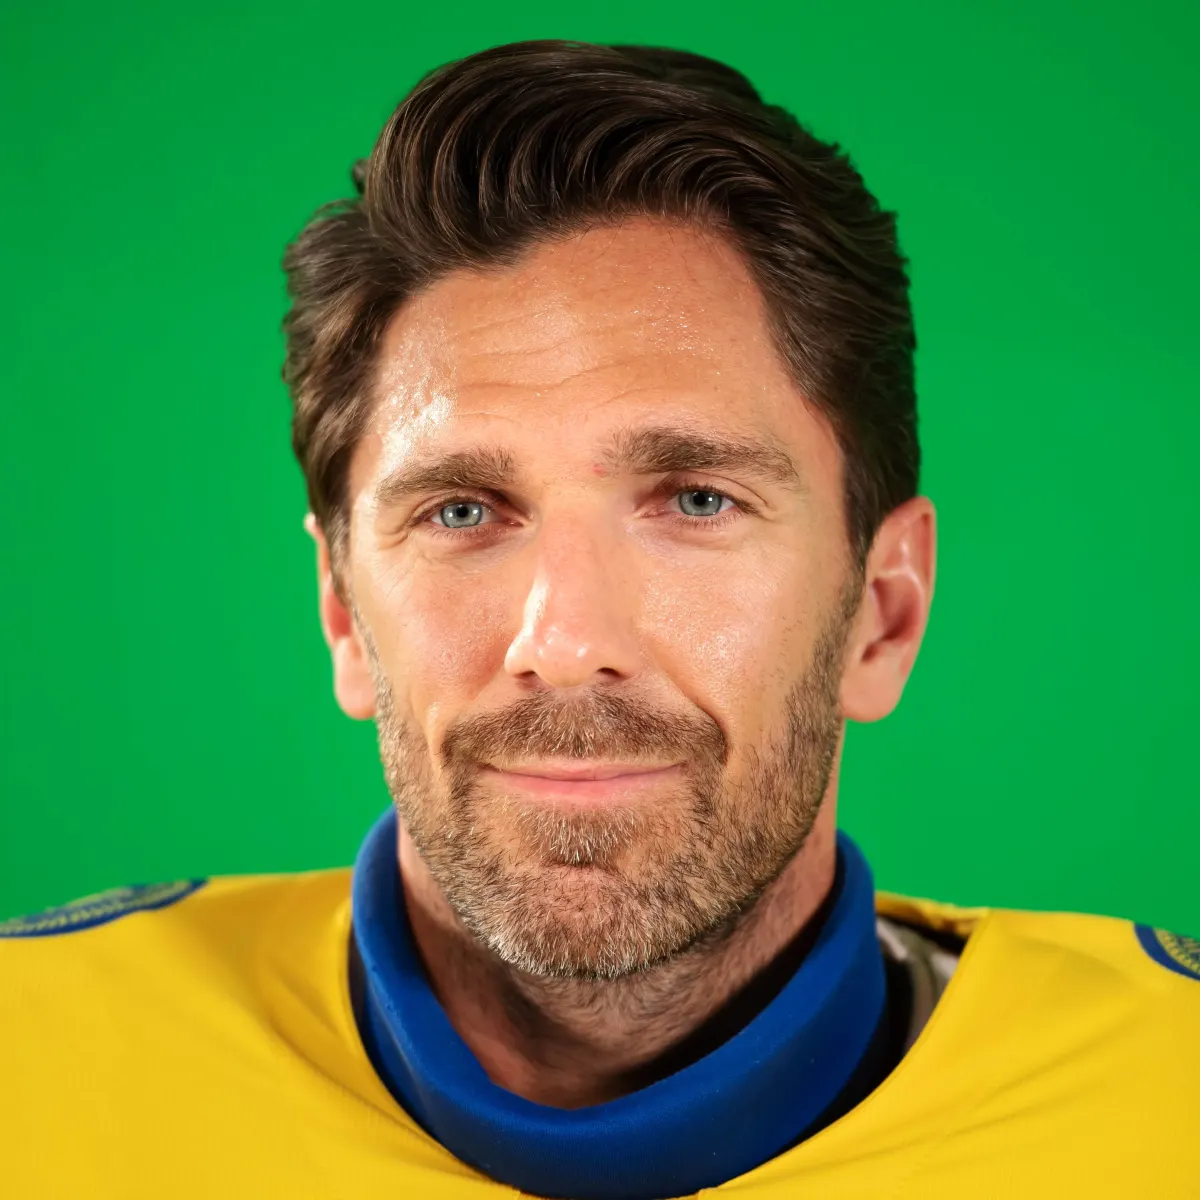 X \ sassy على X: HENRIK LUNDQVIST HAS A TWIN BROTHER NAMED JOEL AND I AM  JUST LEARNING ABOUT THIS NOW!?!?!?!?! 😍🙏🏼😲😭